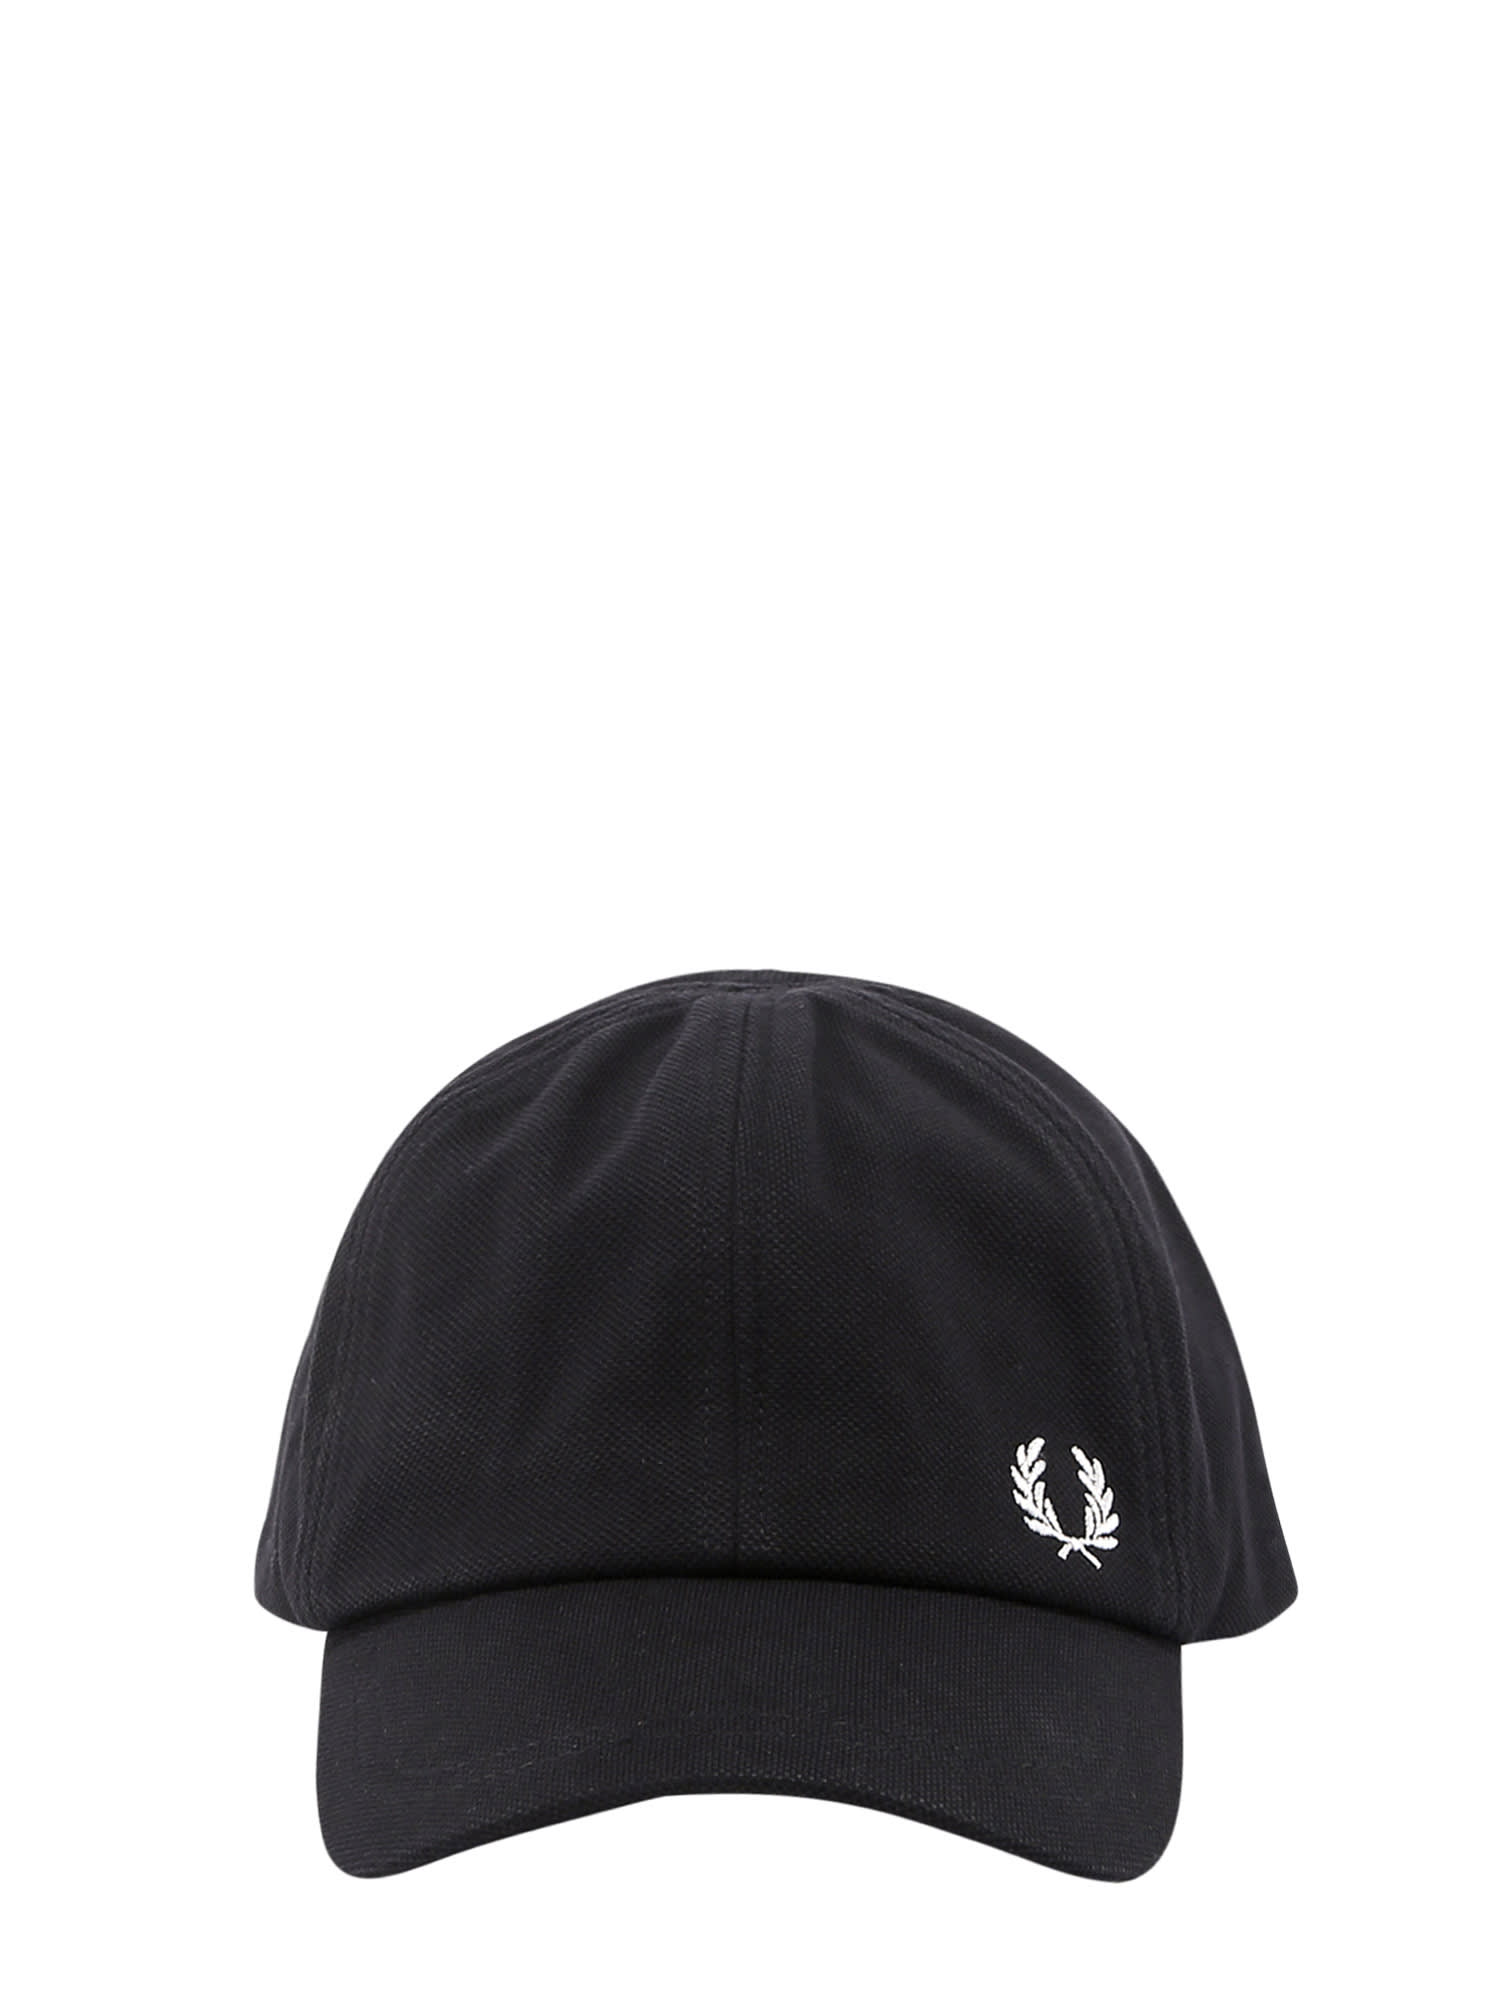 FRED PERRY HAT,FPHW165037 464